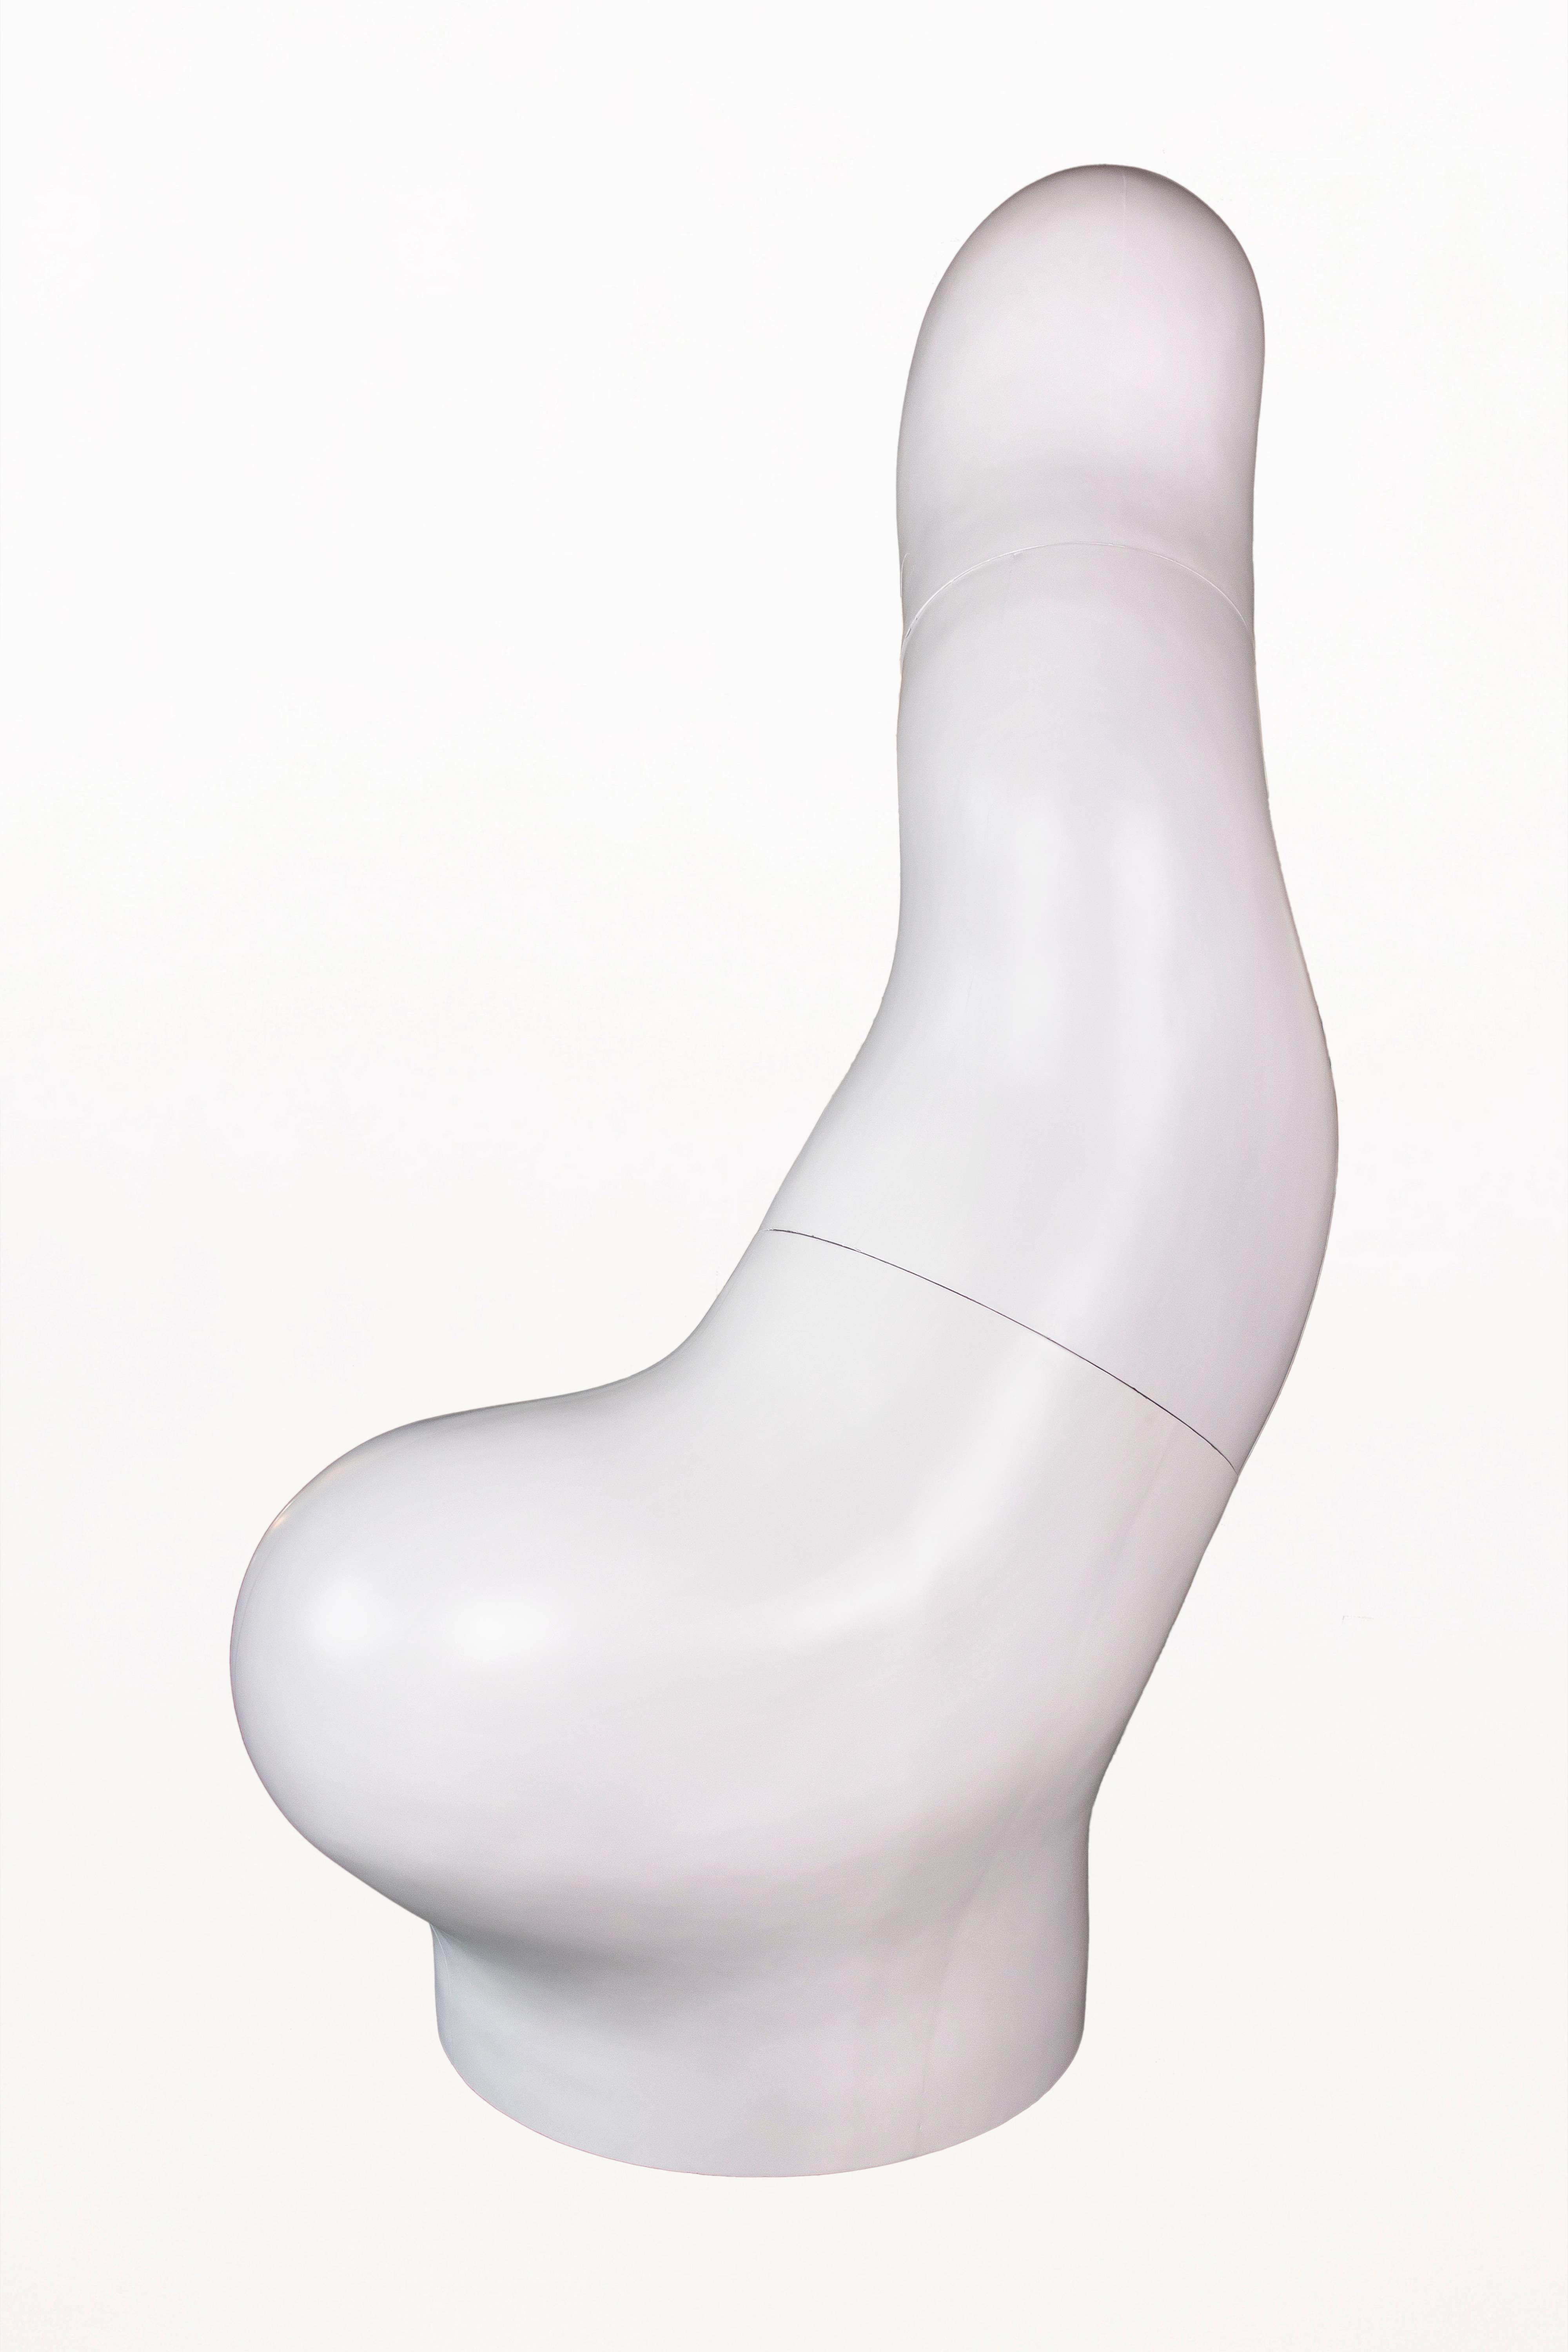 Painted White Lacquered Polymorphic Sculpture by Les Simonnet, circa 1968, France